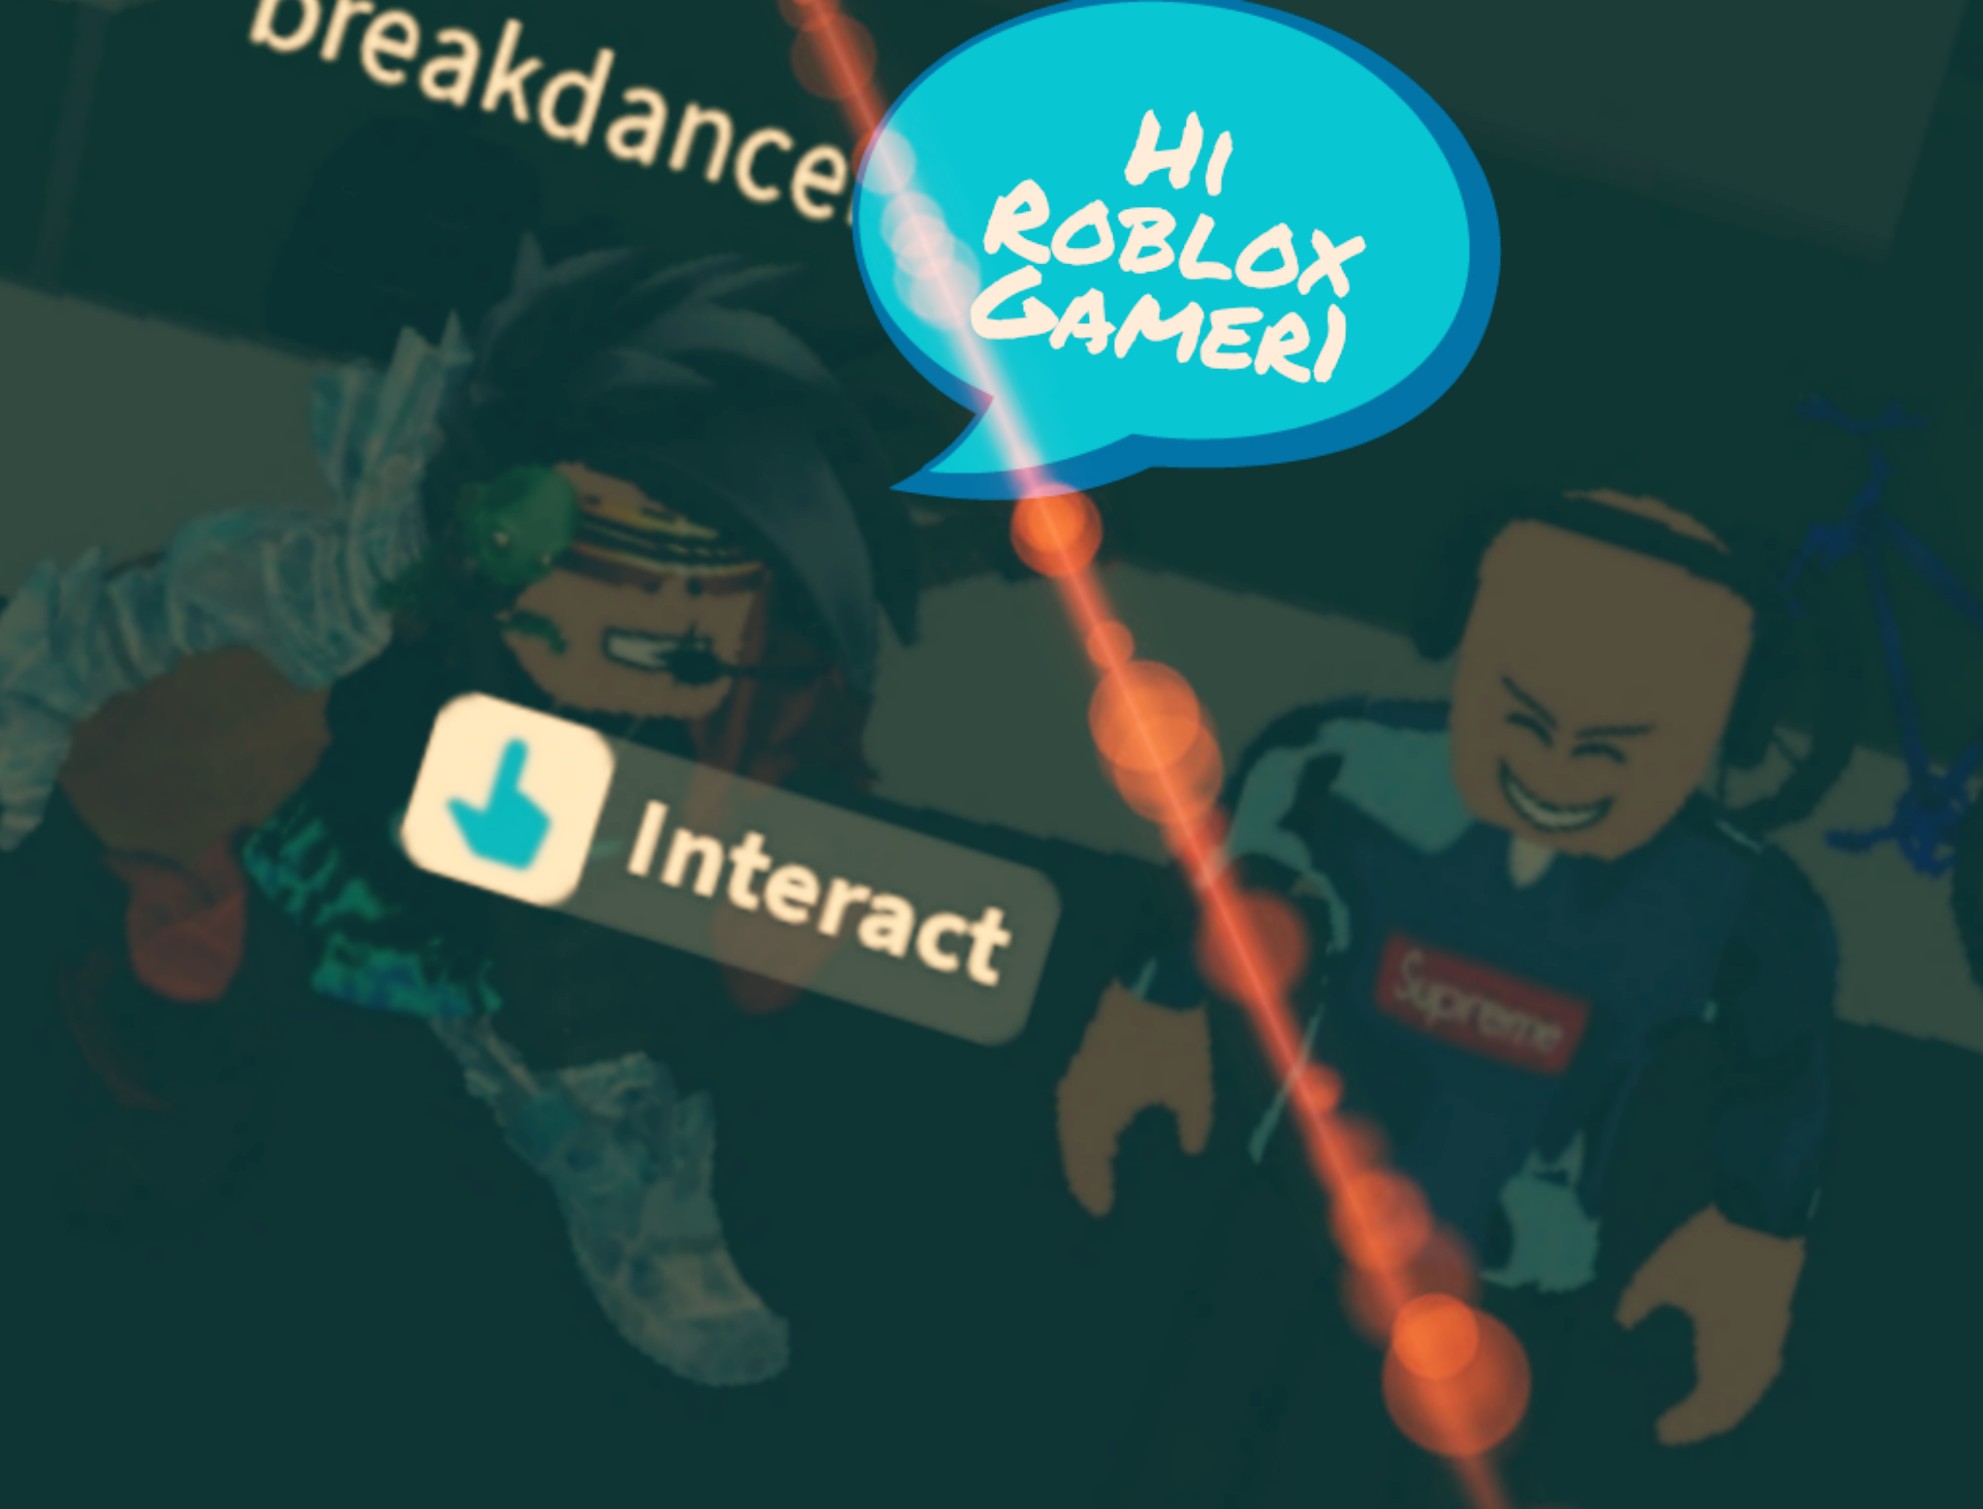 Roblox4life Image By Thekickoffpro9robloxgamer1 - how to breakdance in roblox